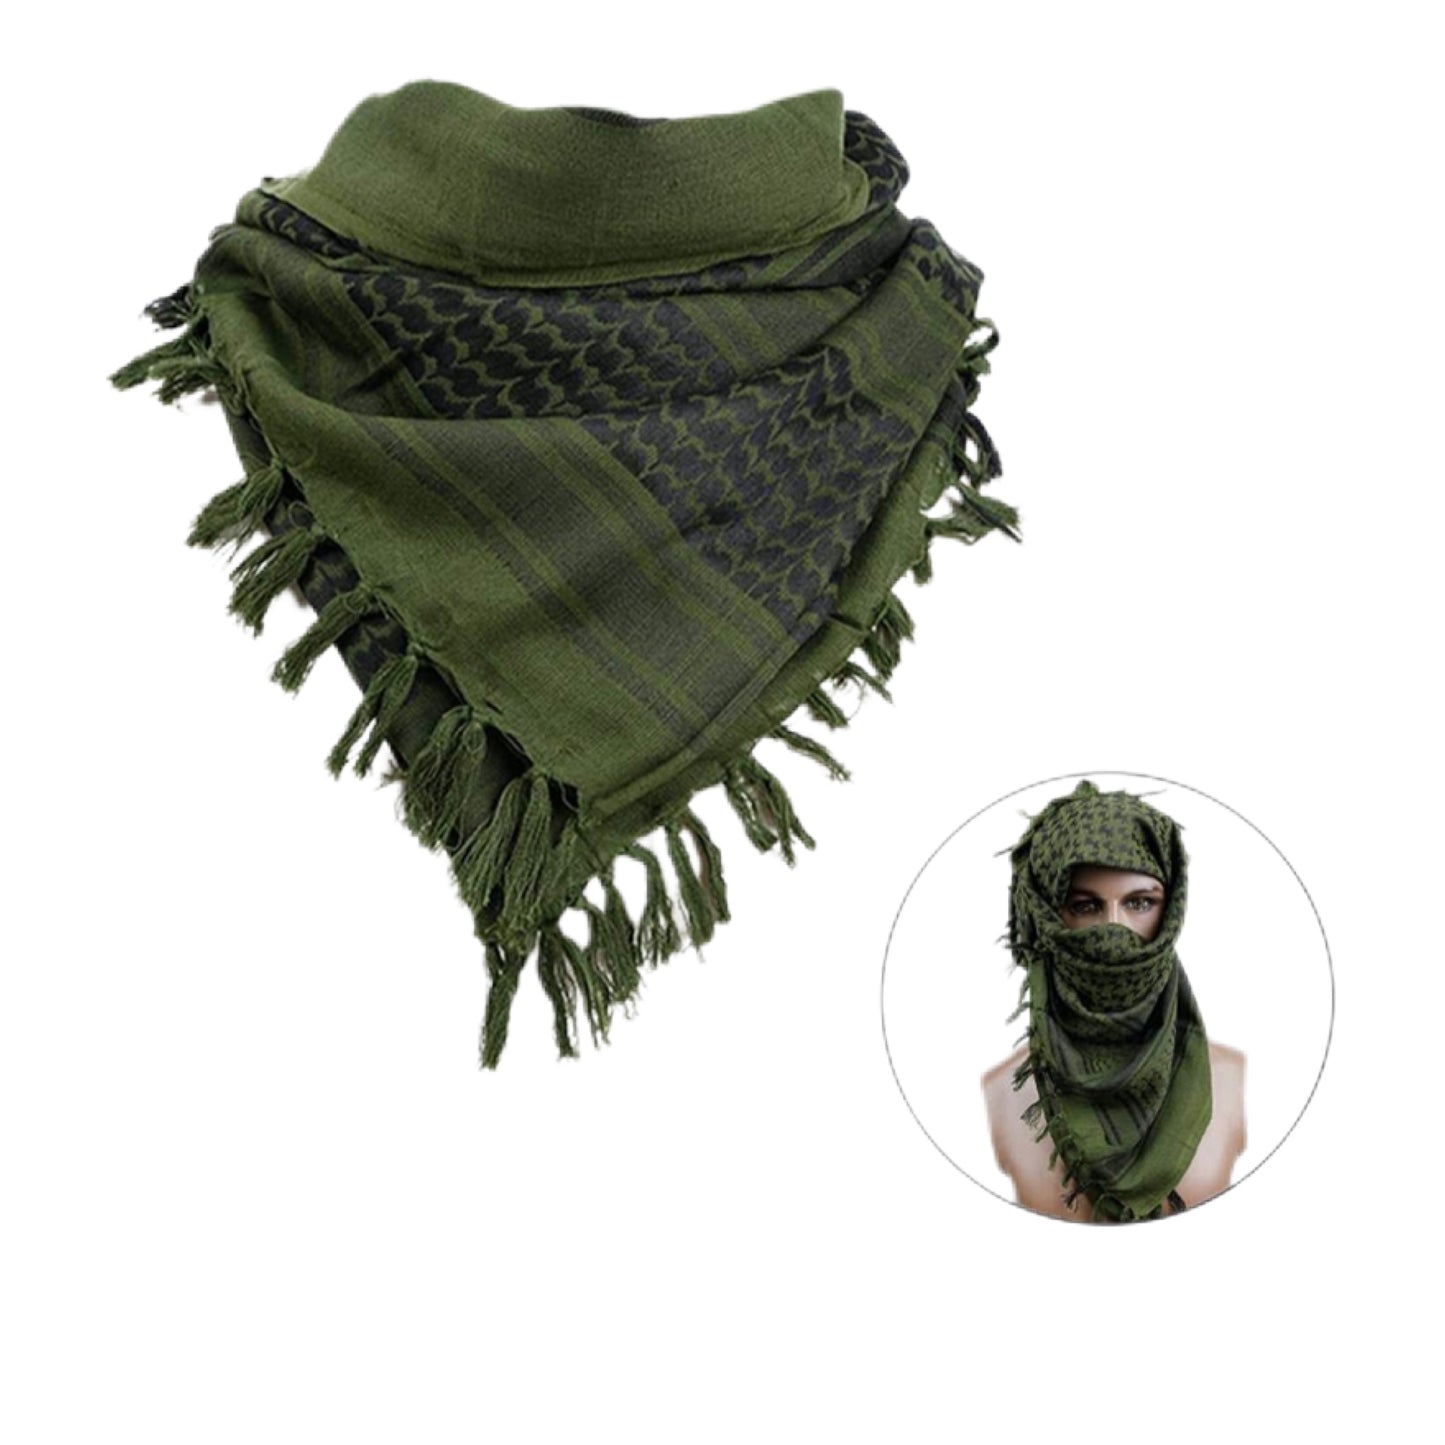 COYOTE SHEMAGH TACTICAL DESERT SCARF